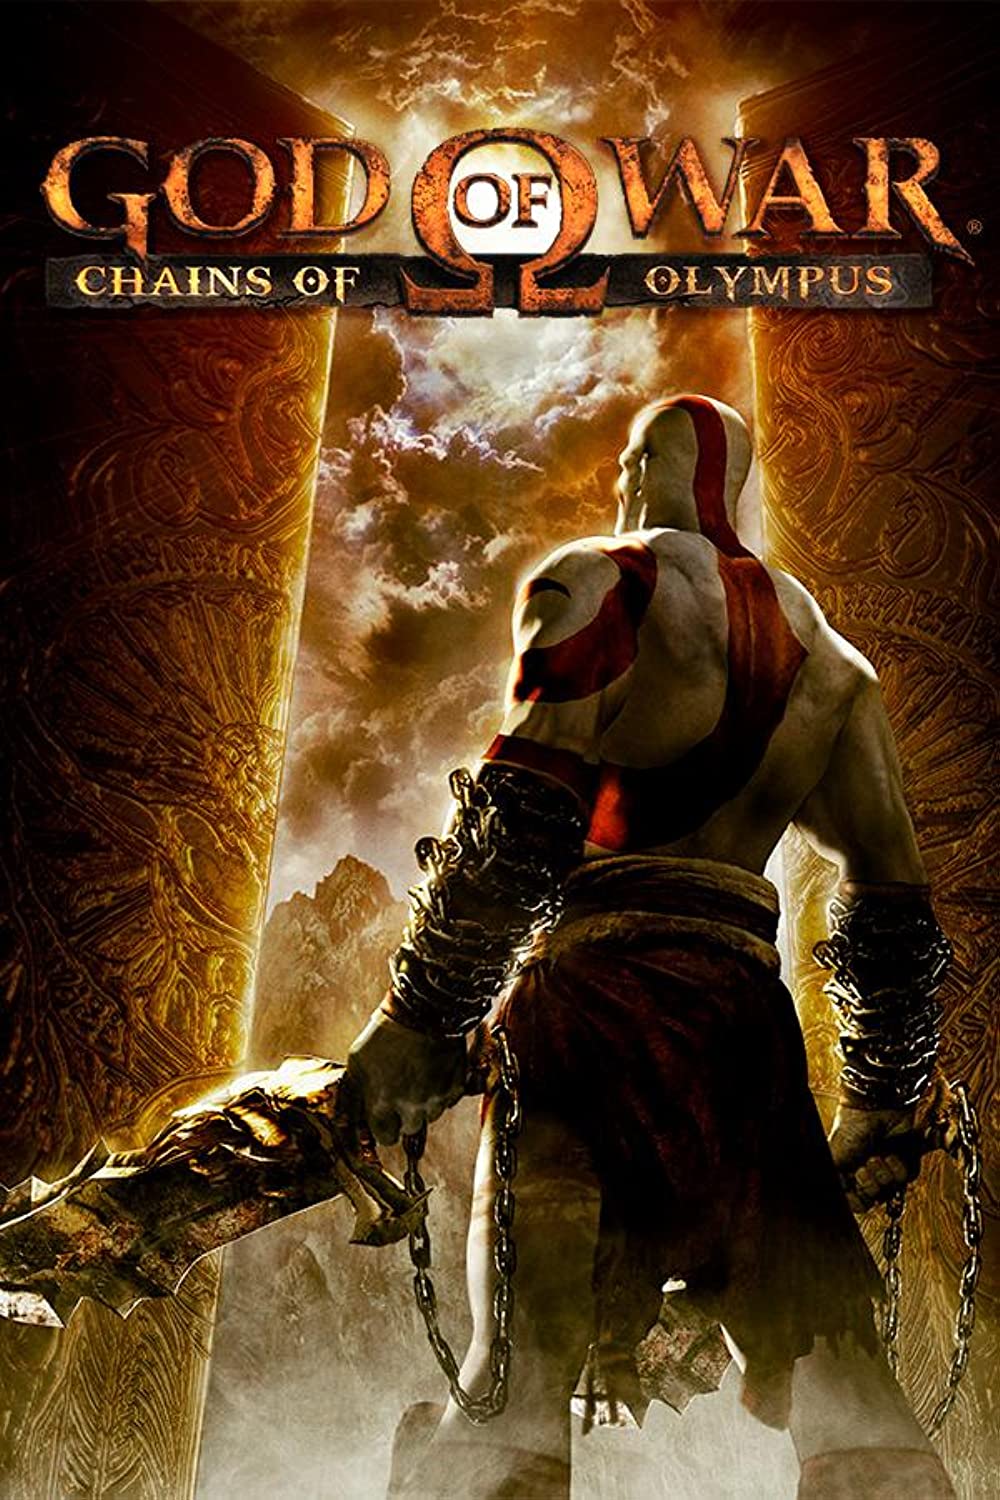 God of War: Chains of Olympus - Longplay 100% All Collectibles